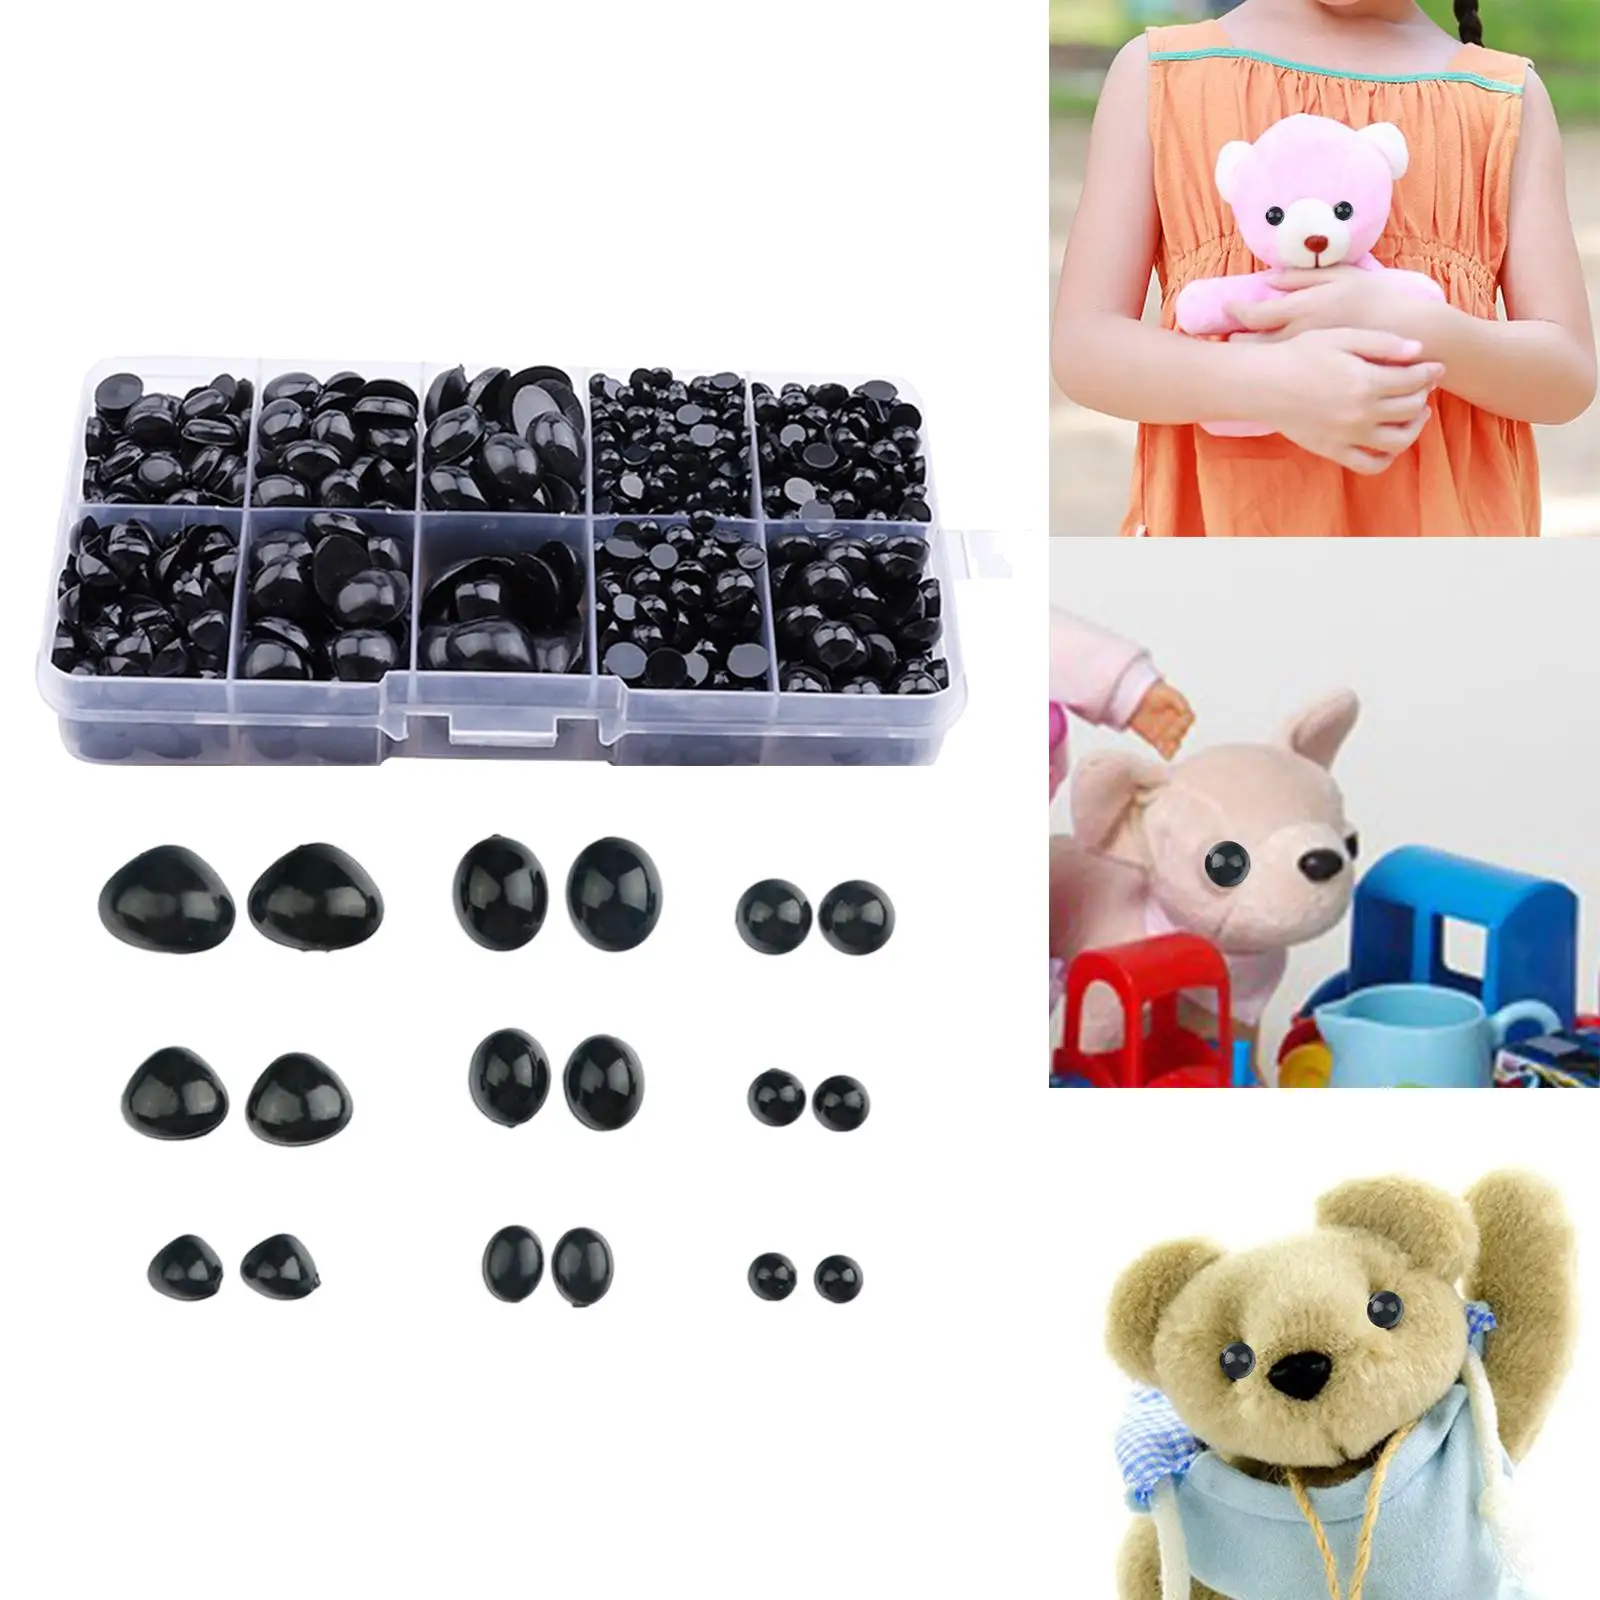 1000Pcs Plastic Safety Eyes and Noses DIY Crafts Eyeball Beads Handmade Craft Doll Eyes for Crochet Toy Bear Stuffed Animals